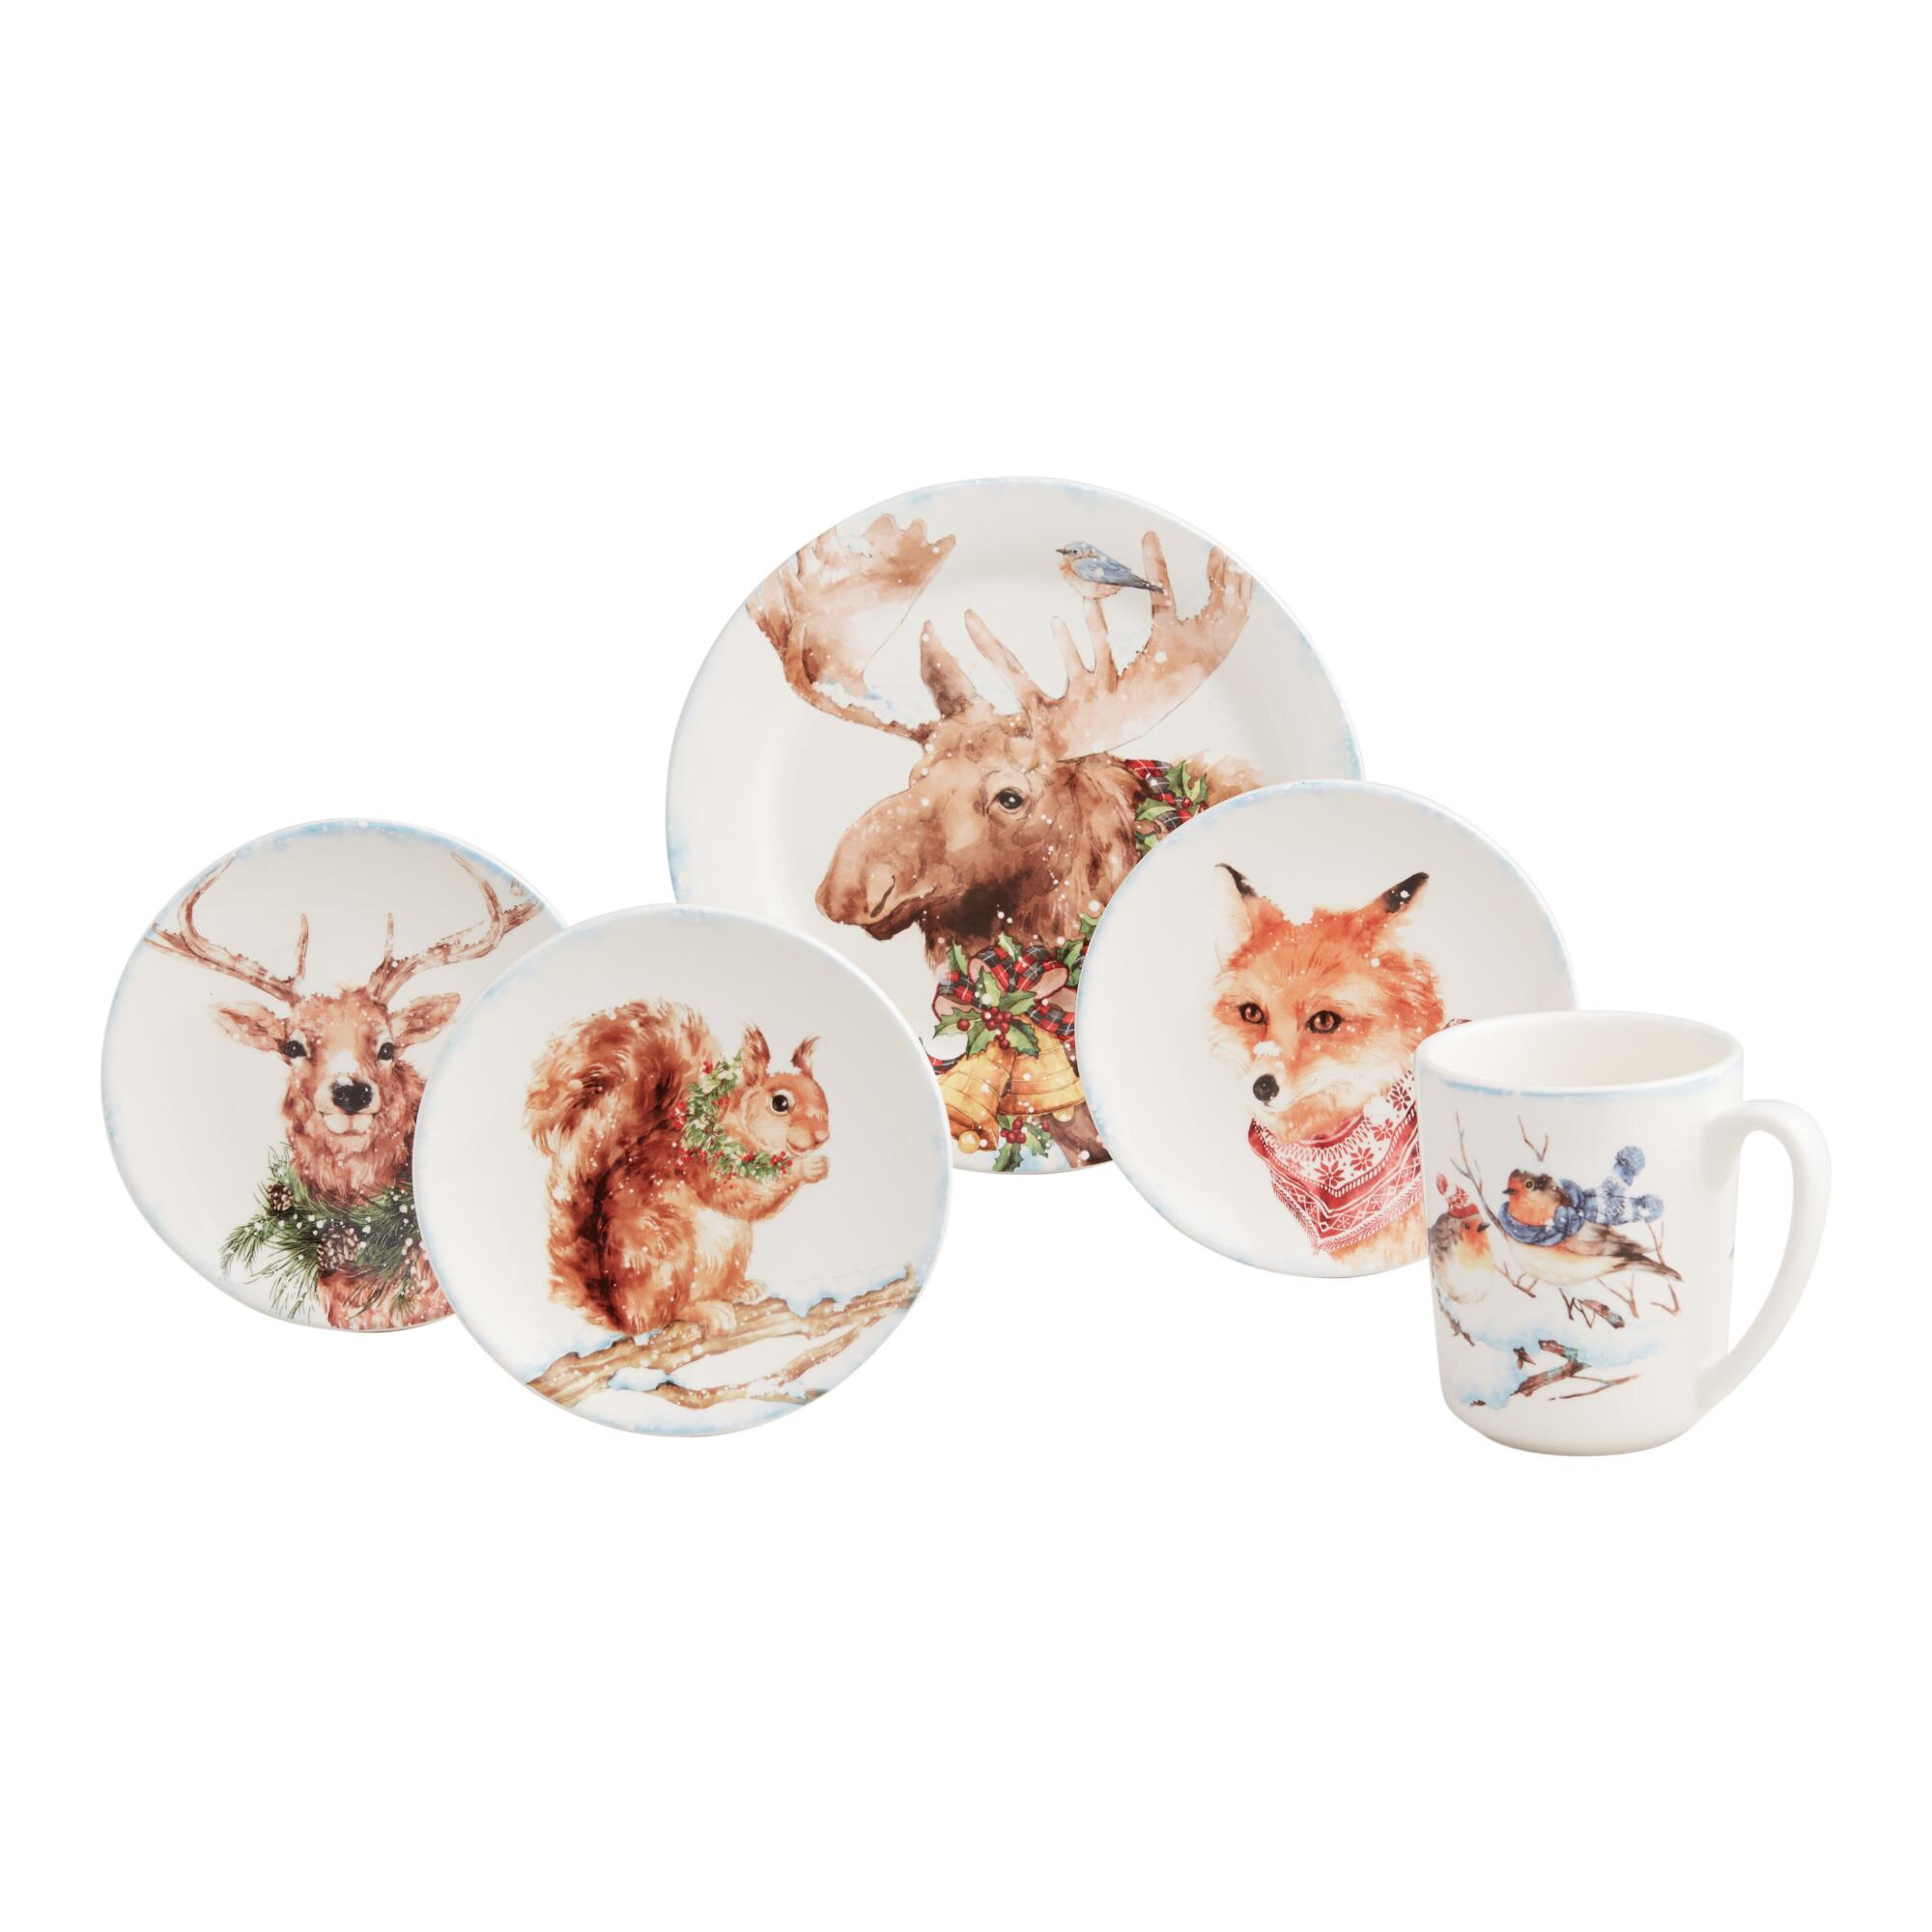 Pier Place Festive Critters Dinnerware Collection by World Market